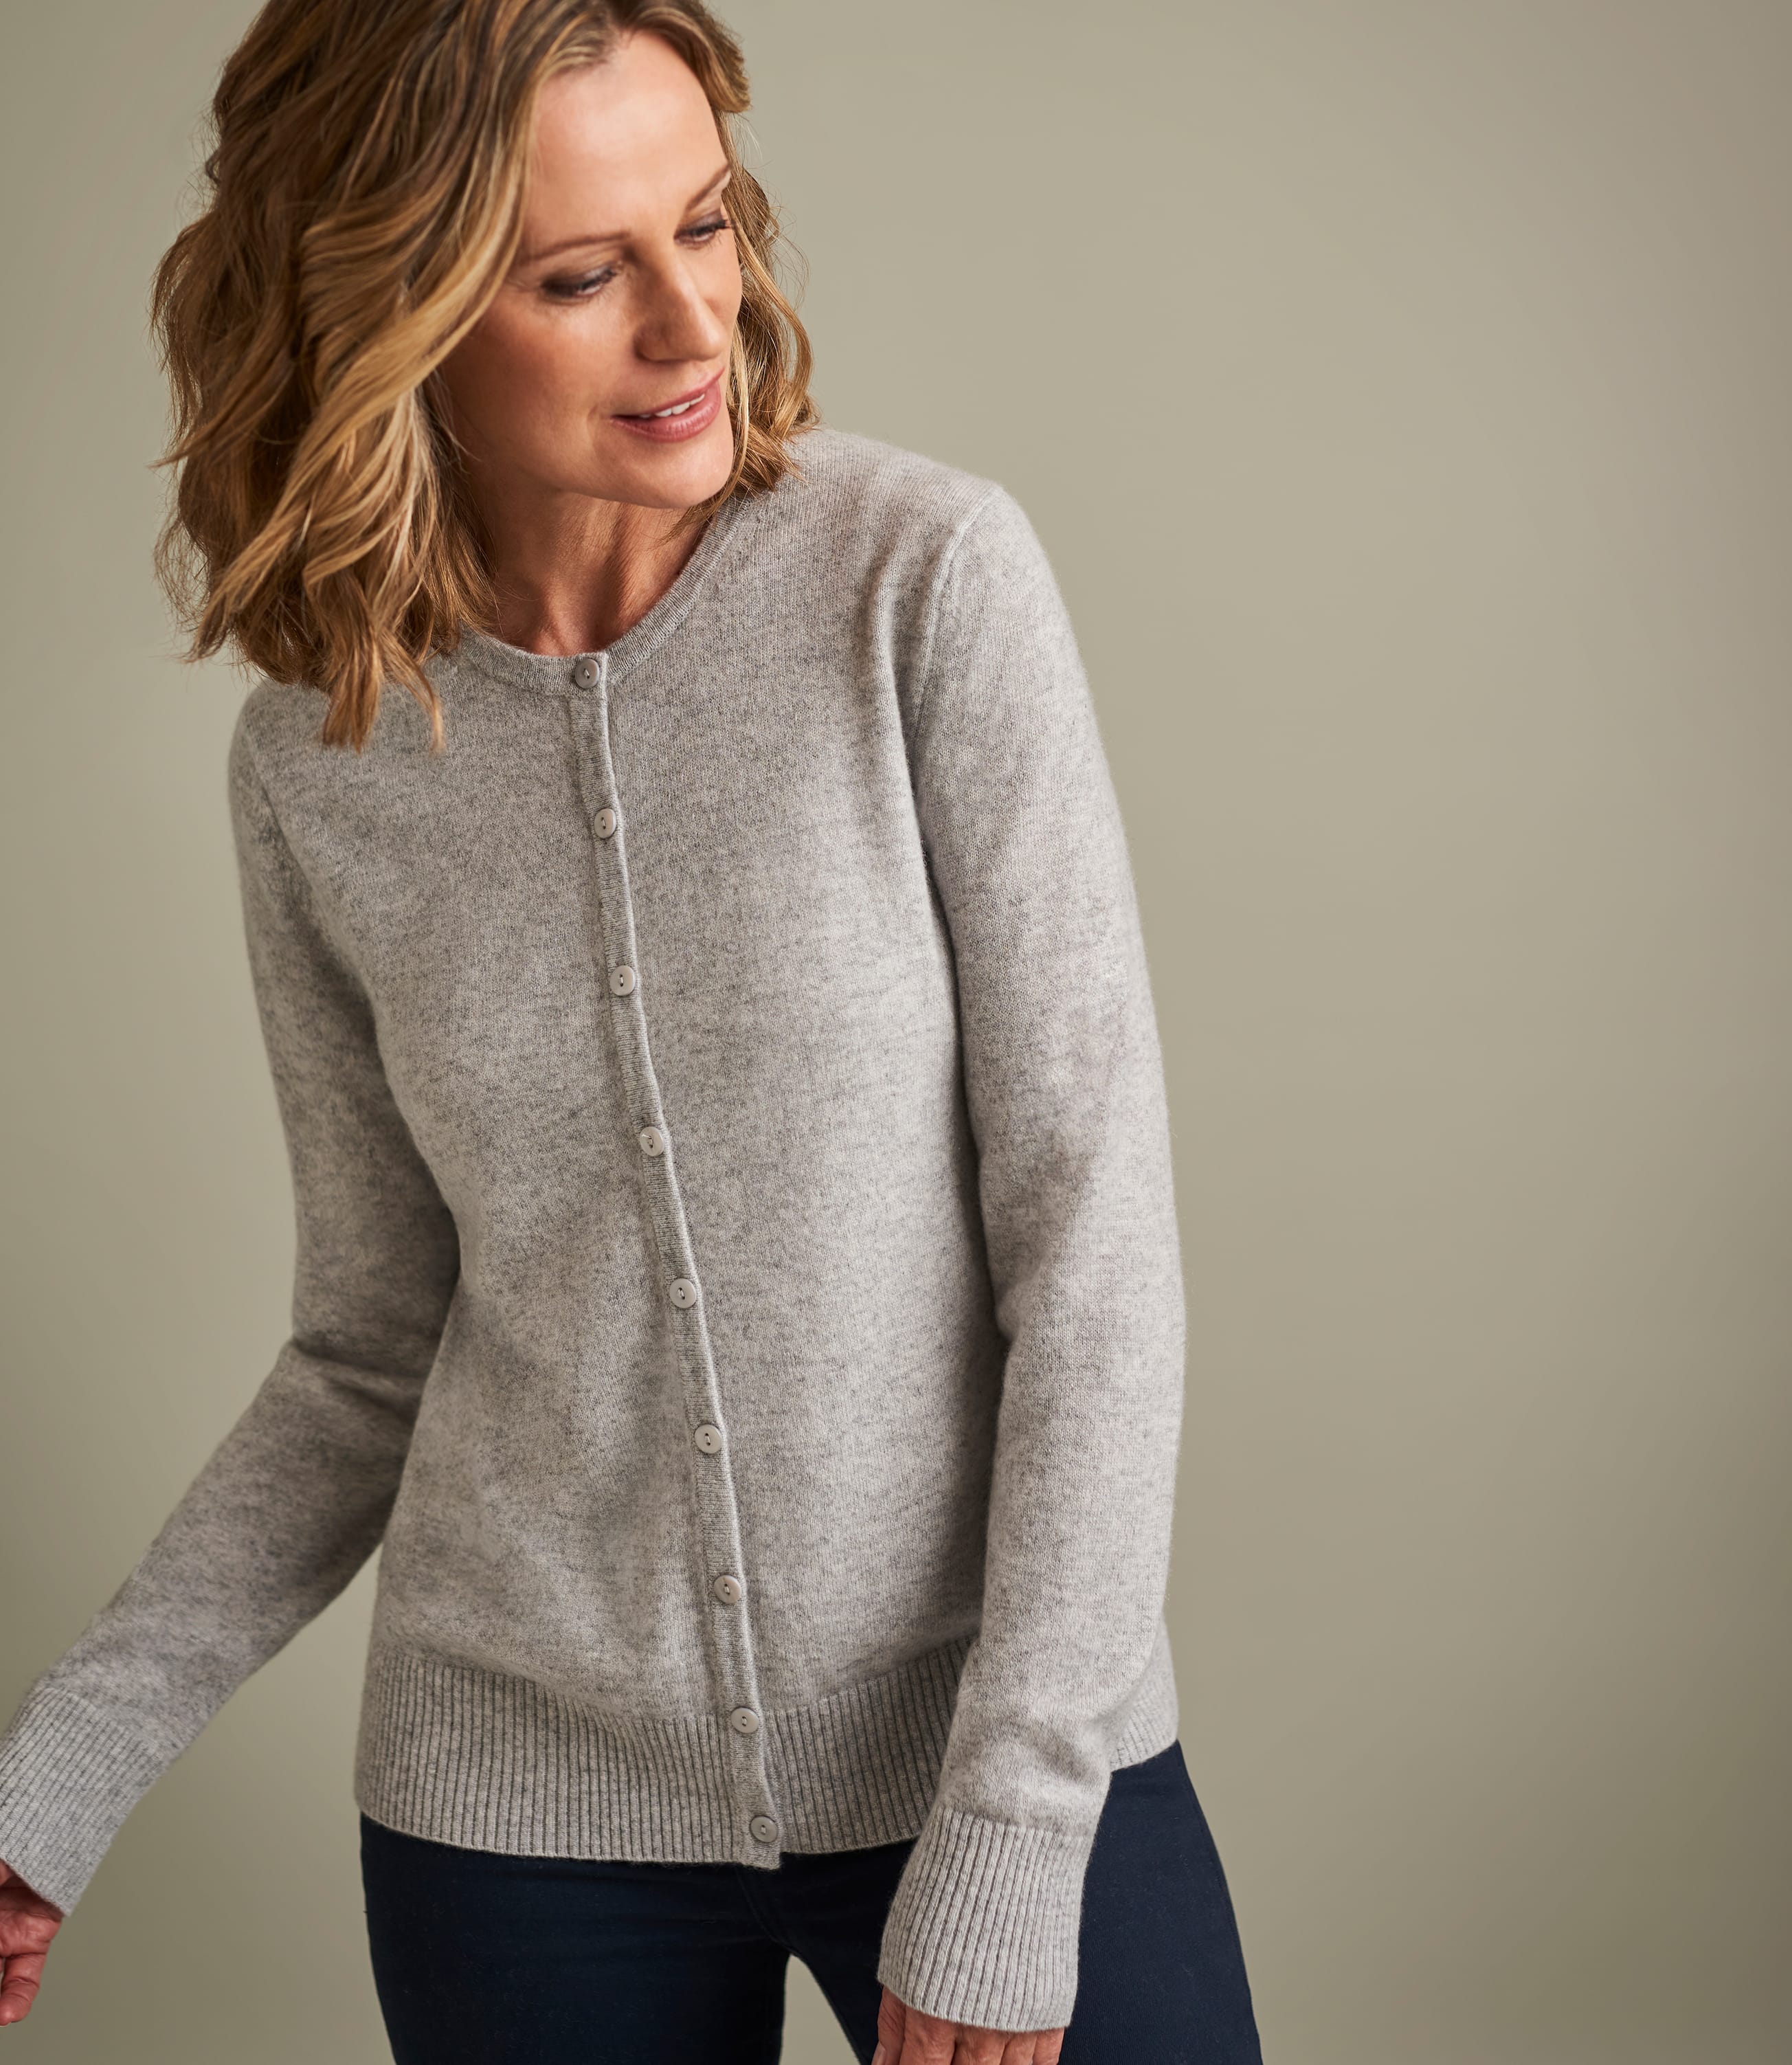 Marble | Womens Luxurious Pure Cashmere Crew Neck Cardigan | WoolOvers UK